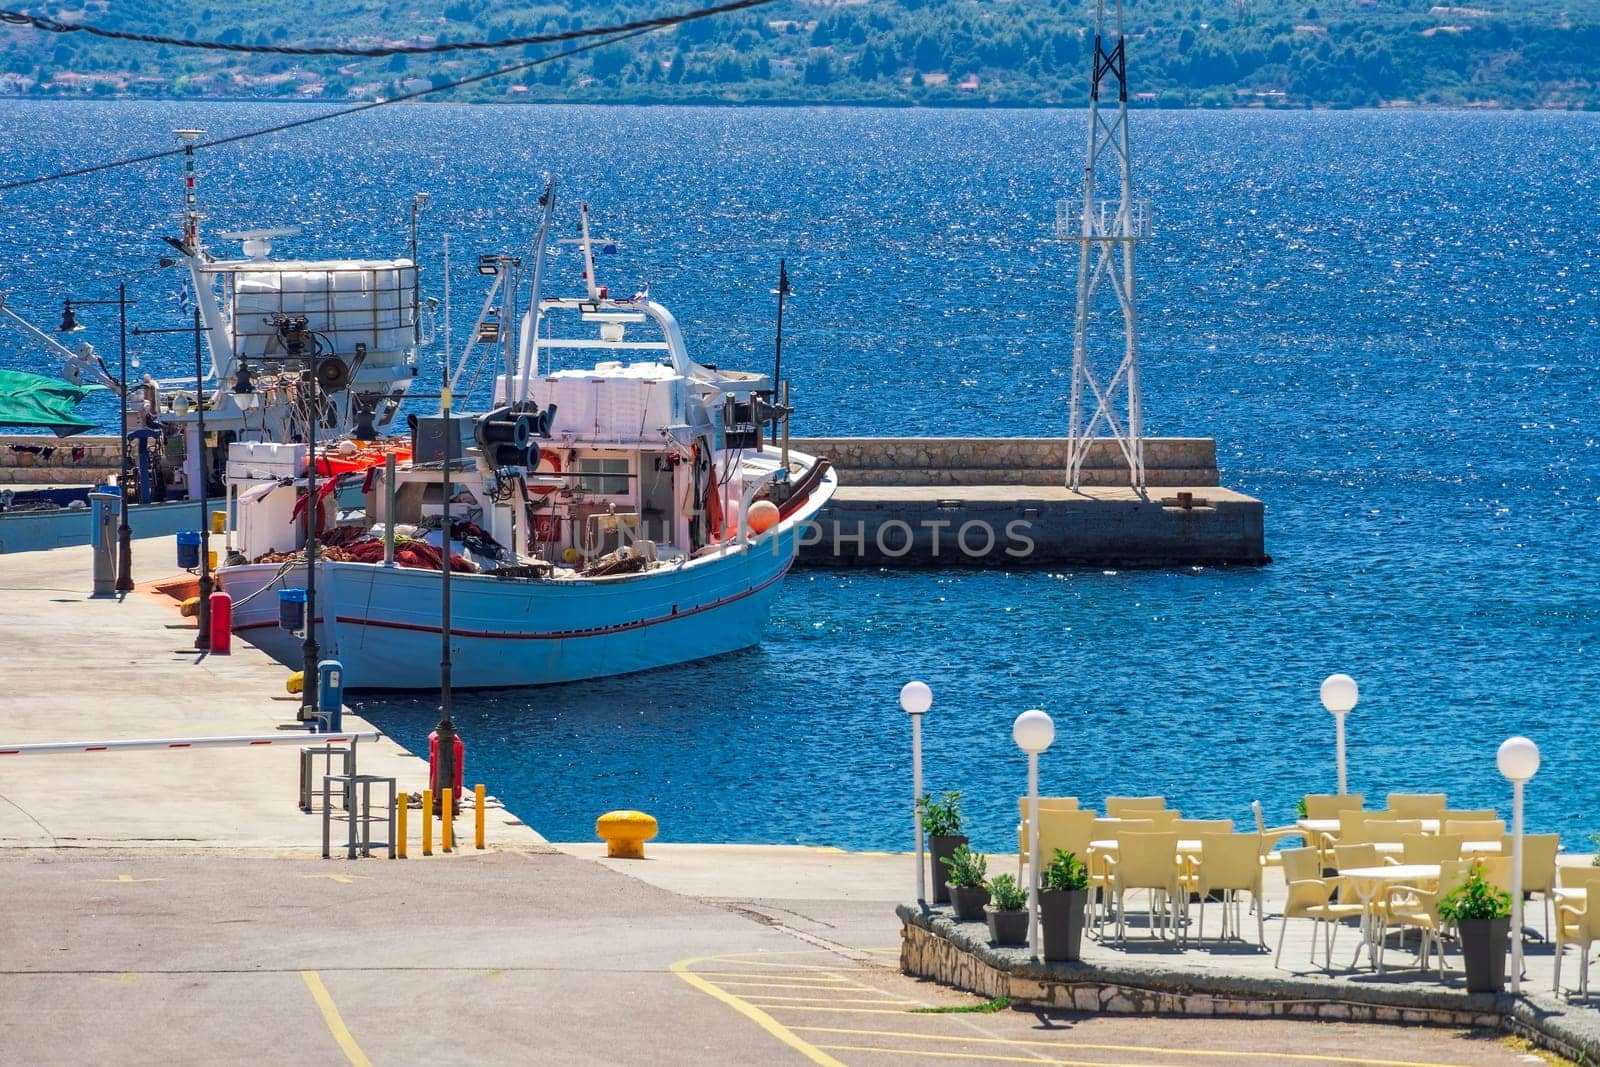 A traditional caique fishing boat with gear moored at a small port around a calm blue sea in Greece.